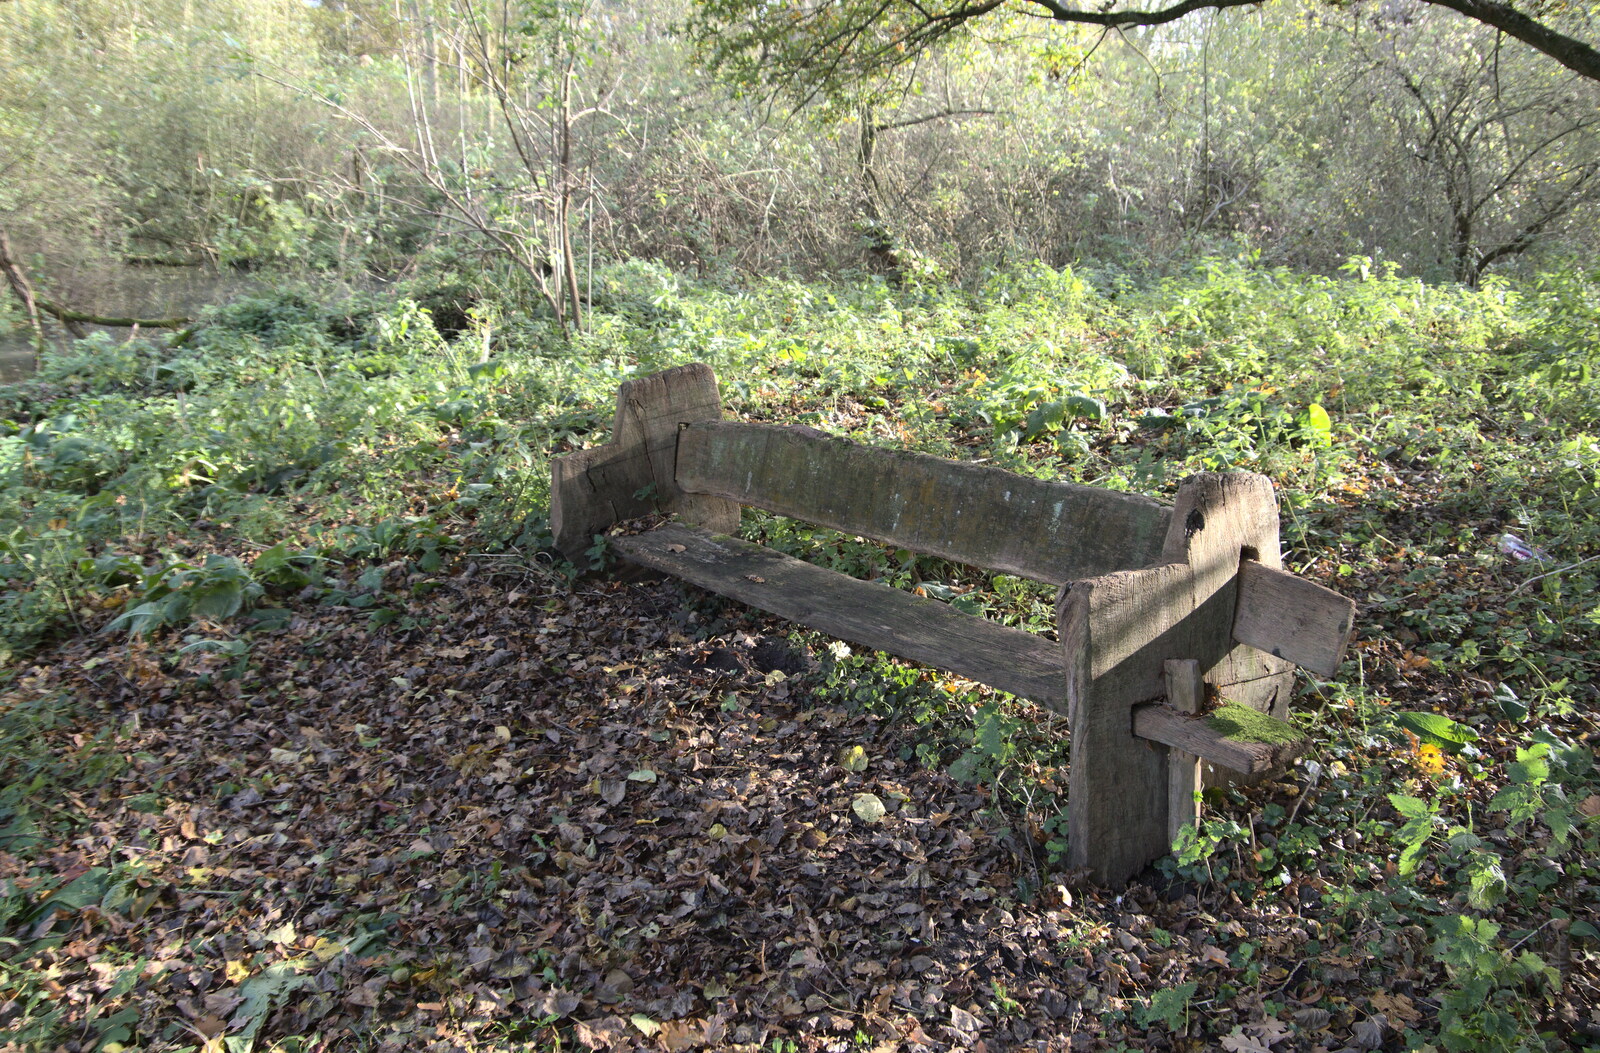 A New Playground and Container Mountain, Eye, Suffolk - 7th November 2021: A bench in the woods